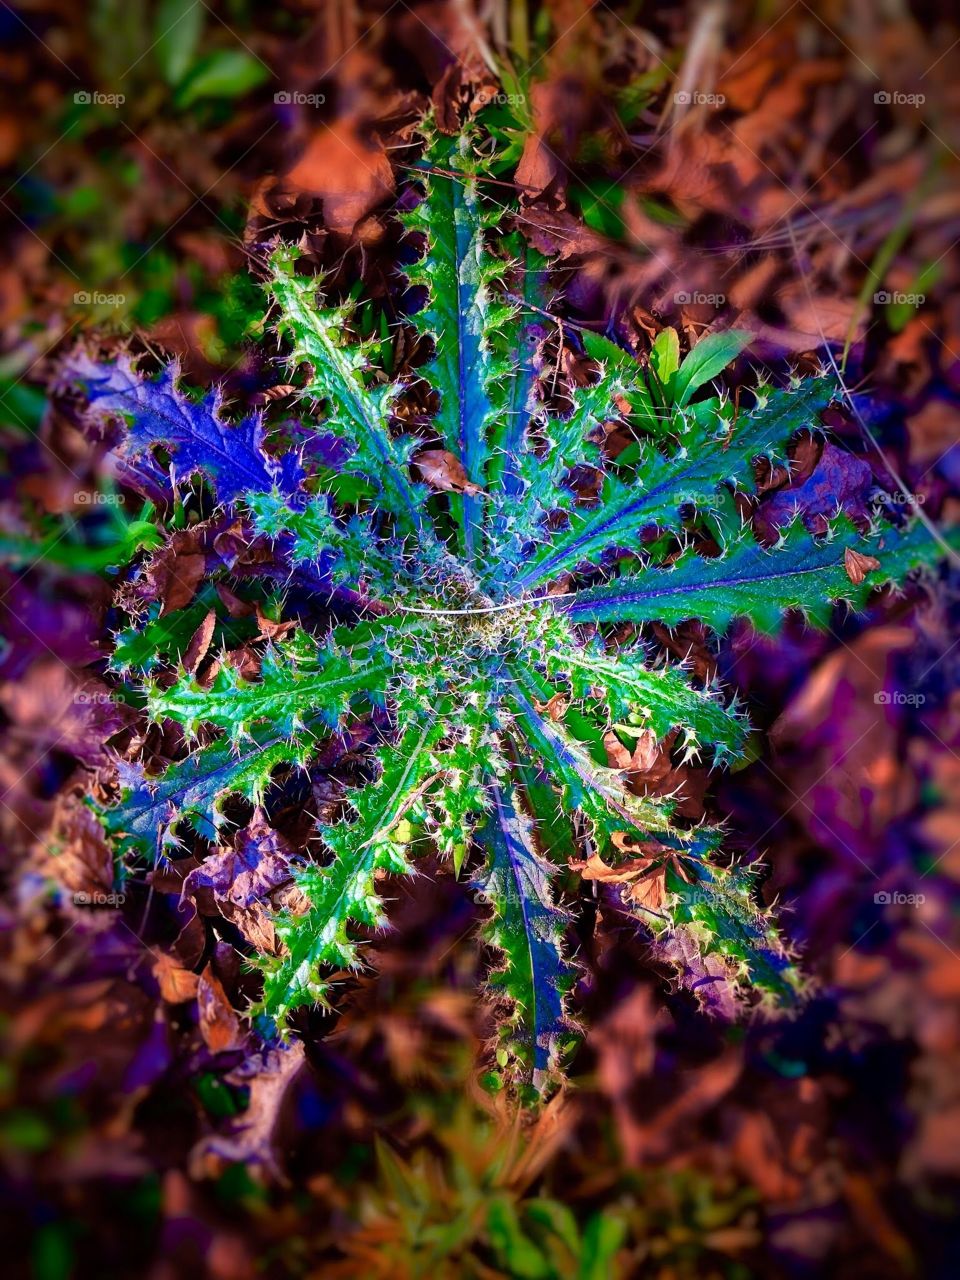 Psychedelic Weed (no pun)